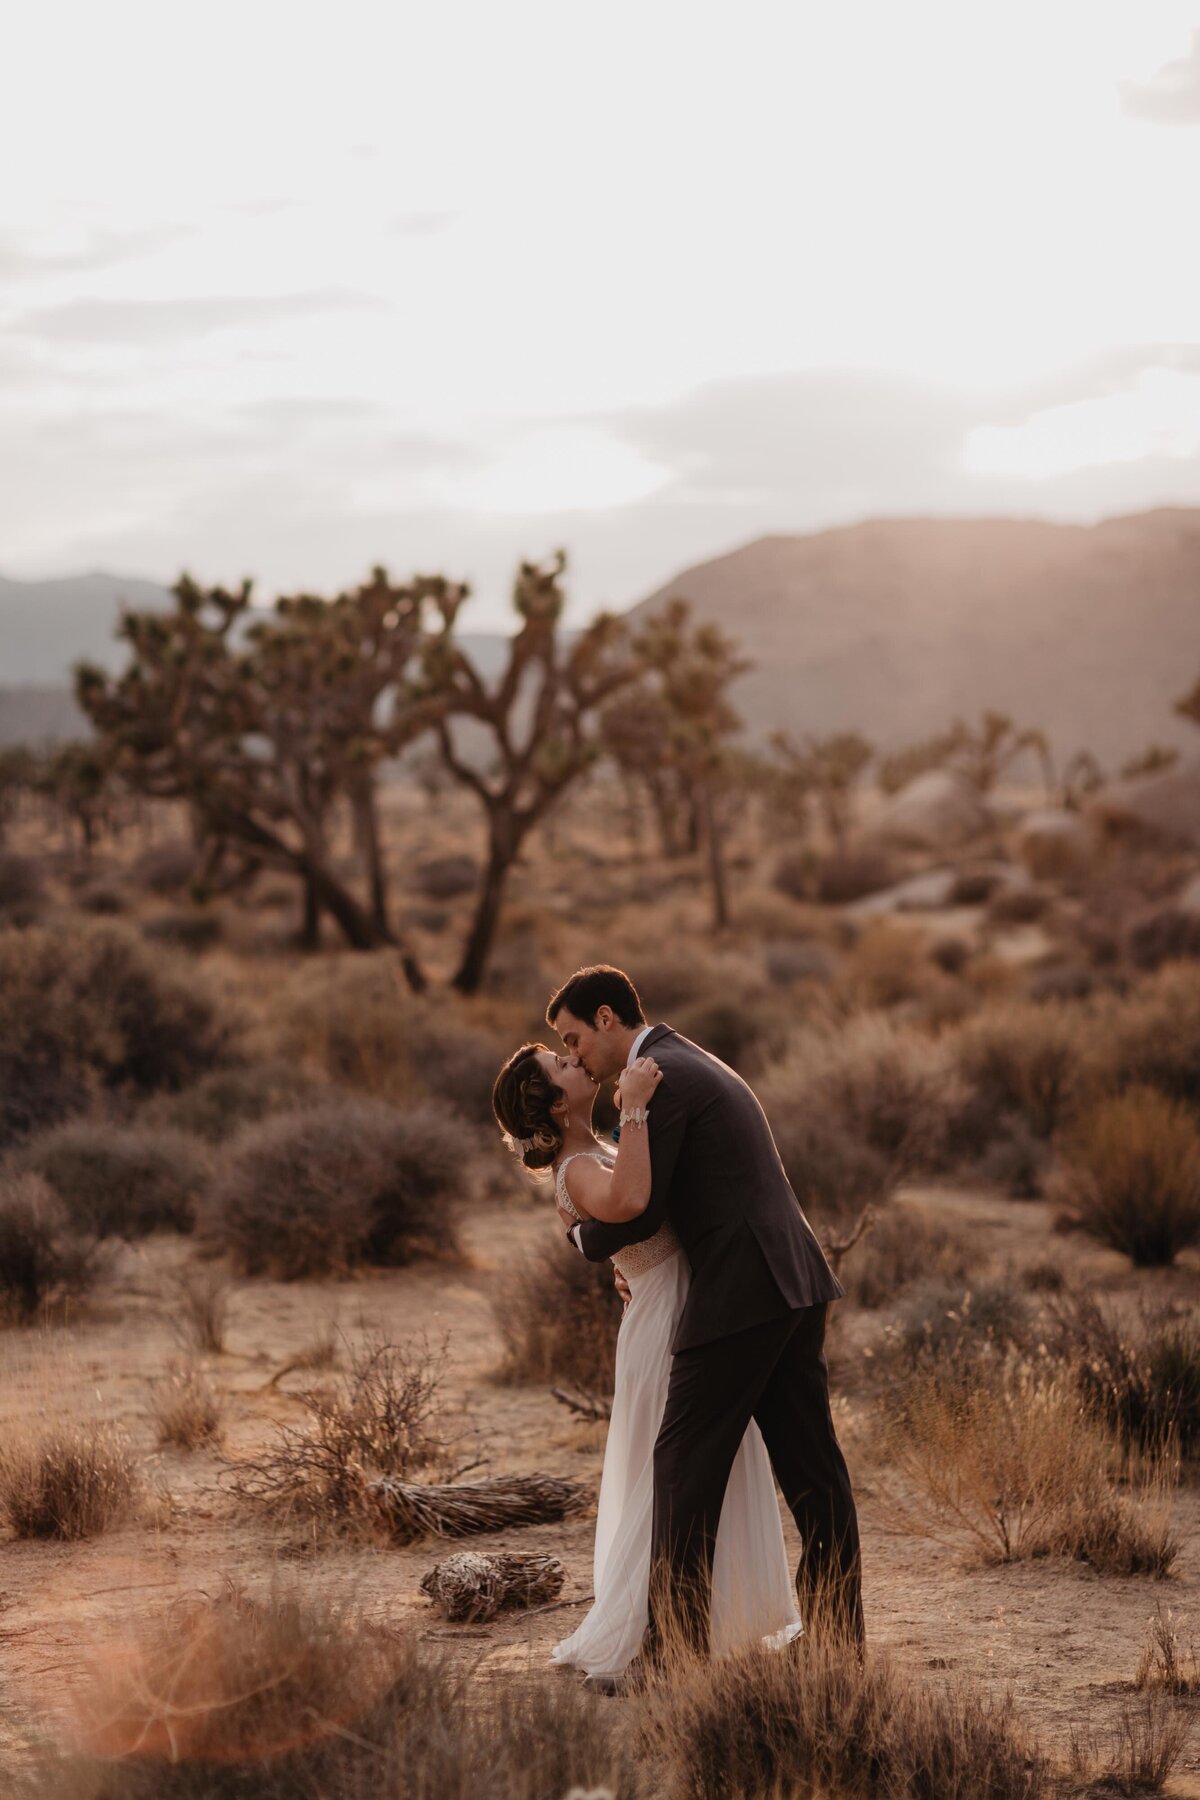 Destination elopement in Joshua Tree National Park by adventure wedding photographer Magnolia and Ember.